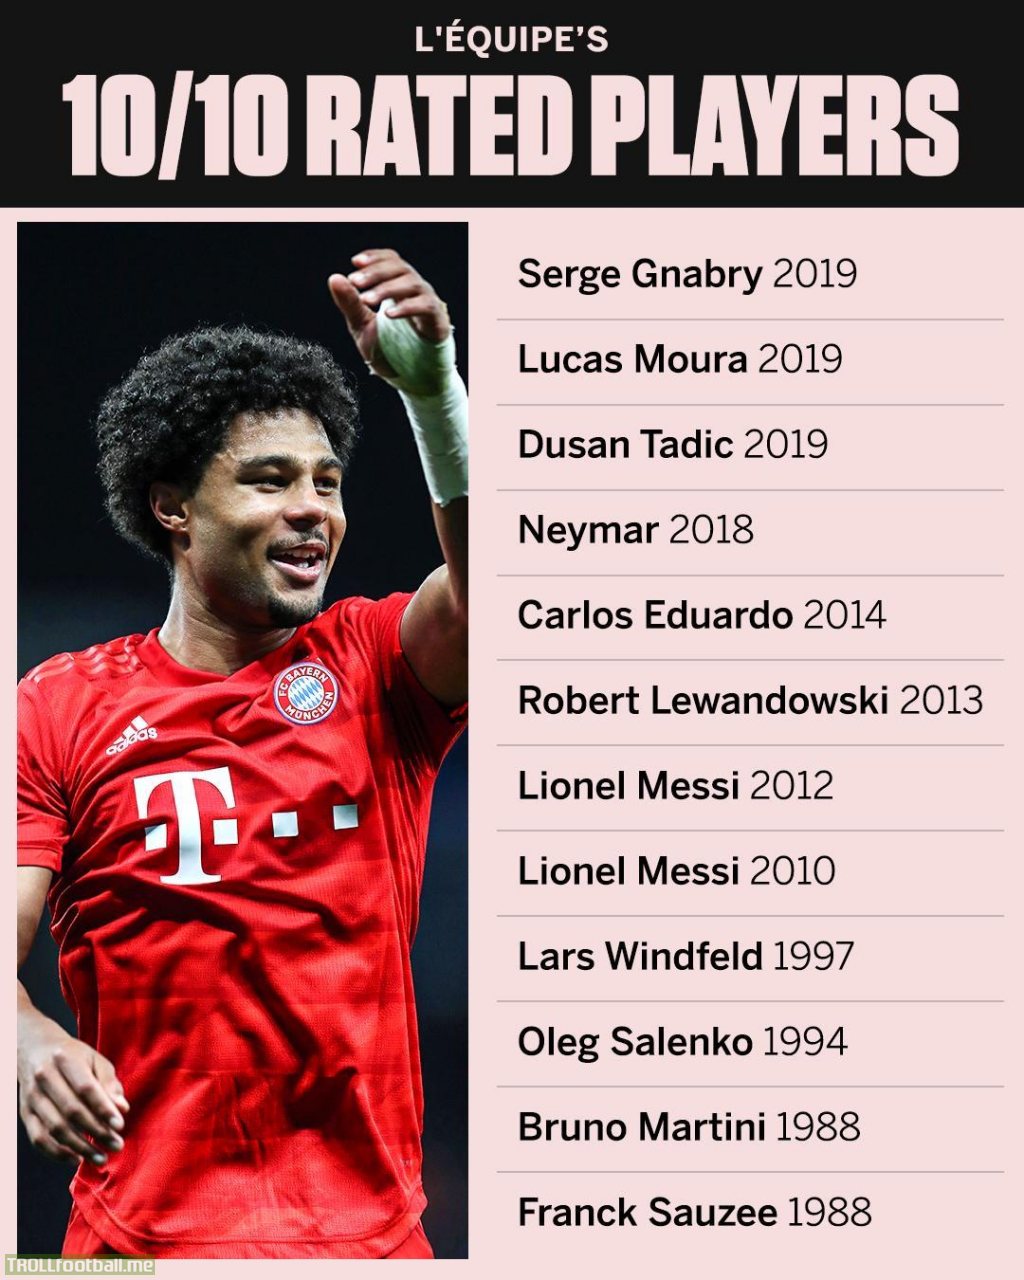 Players that have been given a 10/10 rating by L’Équipe